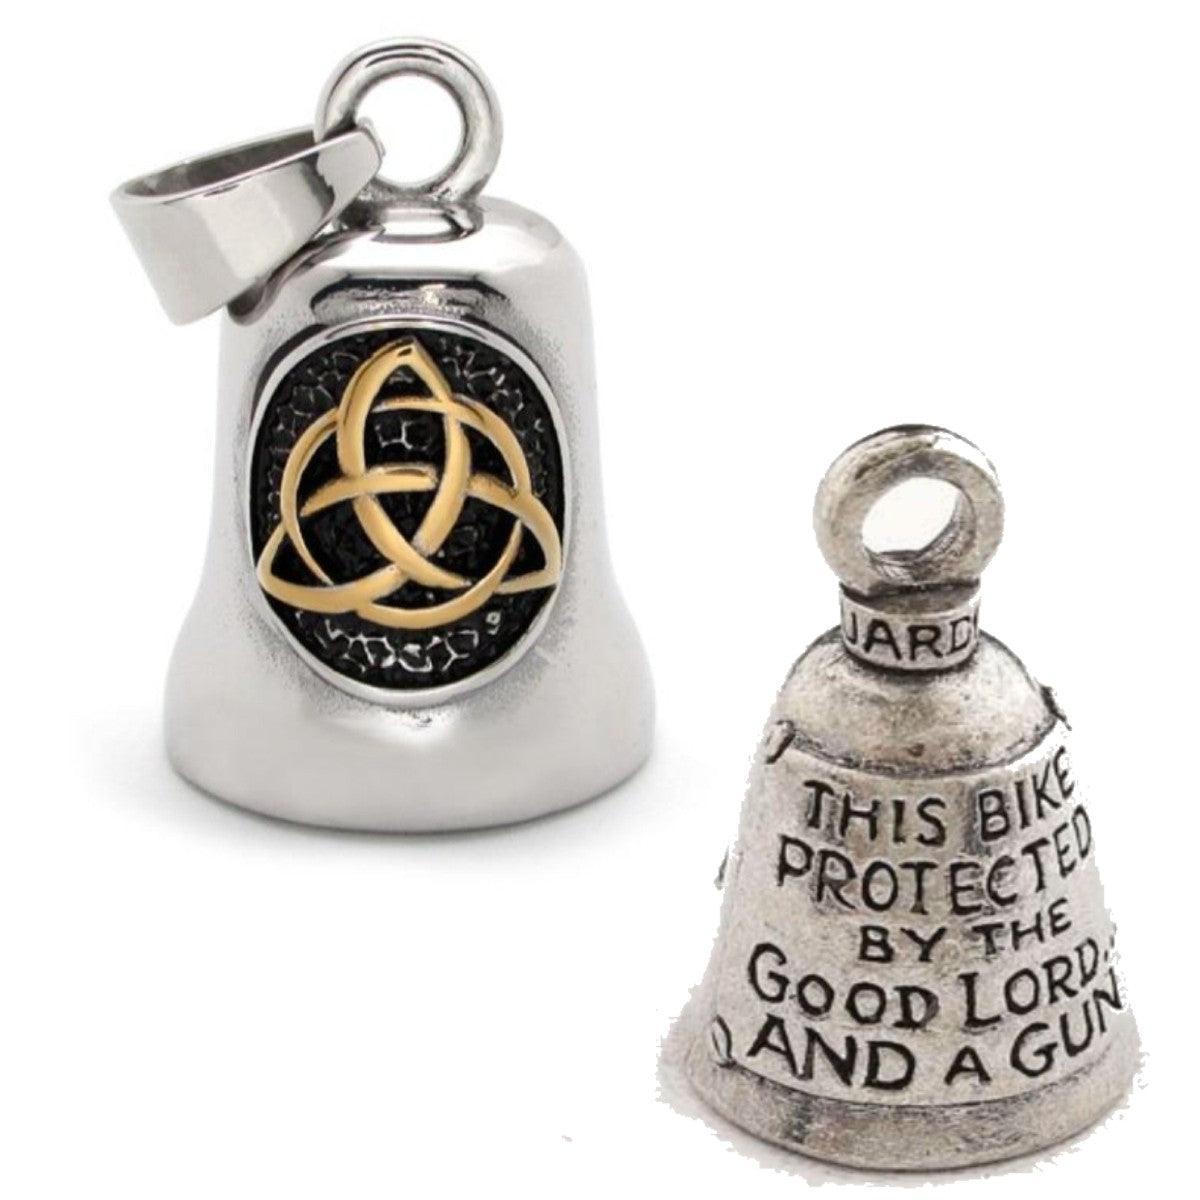 Father & Son Celtic Knot Gremlin Bell with This Bike Protected by the Good Lord Bell Bundle - American Legend Rider